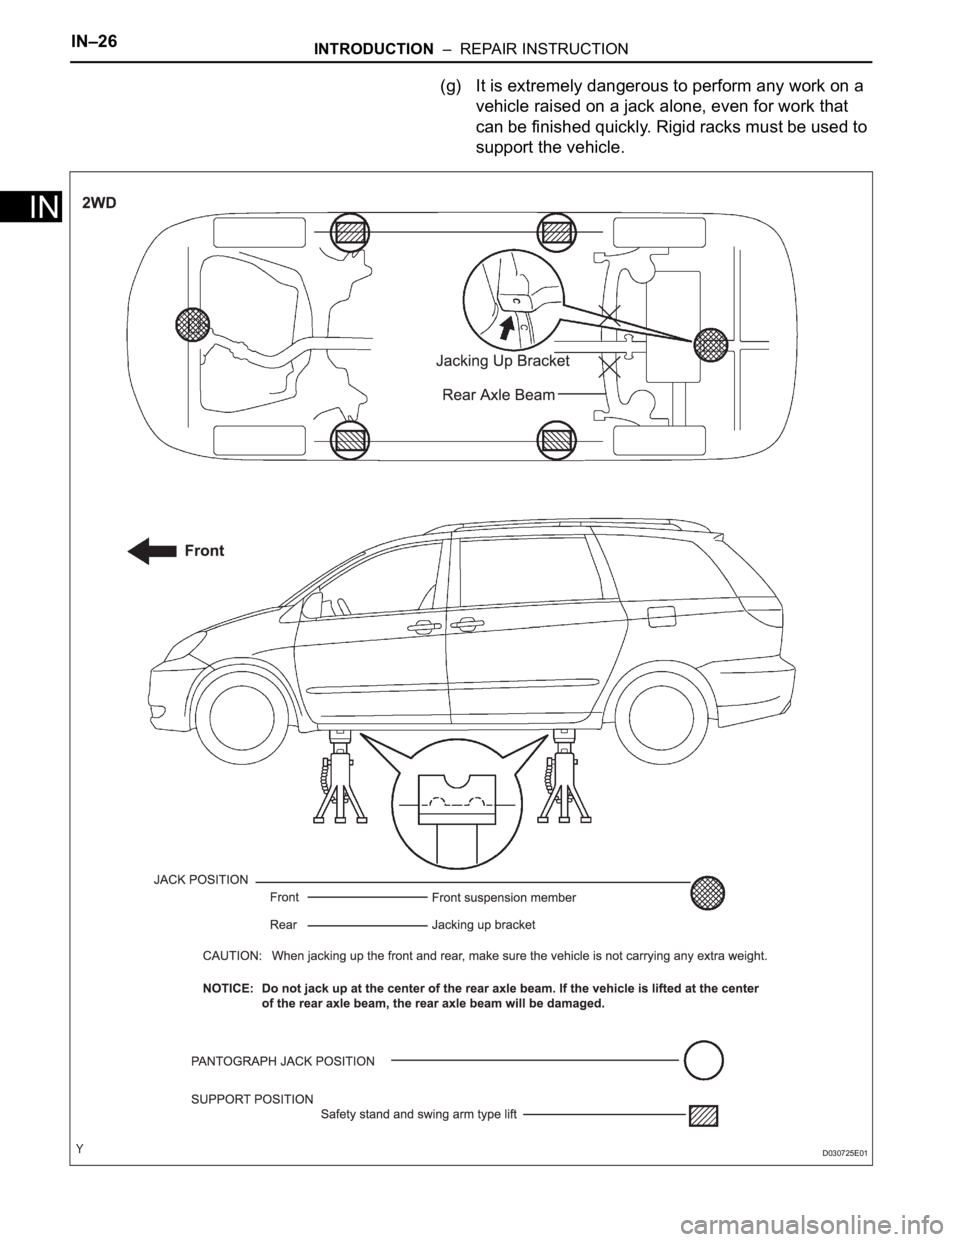 TOYOTA SIENNA 2007  Service Repair Manual IN–26INTRODUCTION  –  REPAIR INSTRUCTION
IN
(g) It is extremely dangerous to perform any work on a 
vehicle raised on a jack alone, even for work that 
can be finished quickly. Rigid racks must be